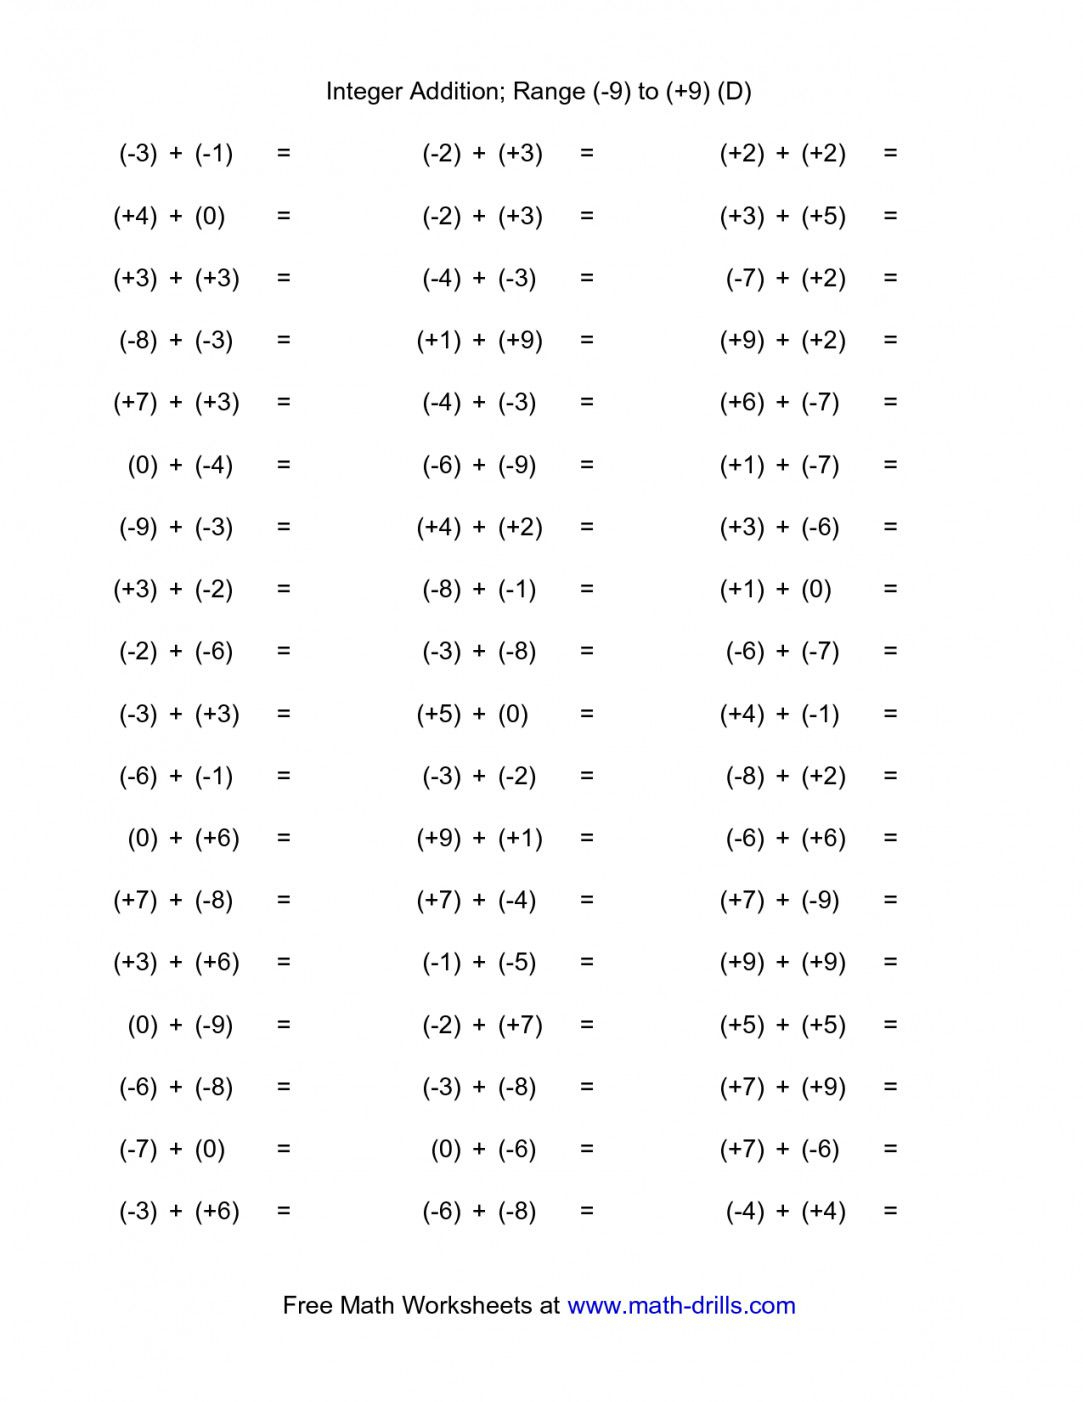 Integers Rules Number Line Notes And Practice Problems Worksheets 